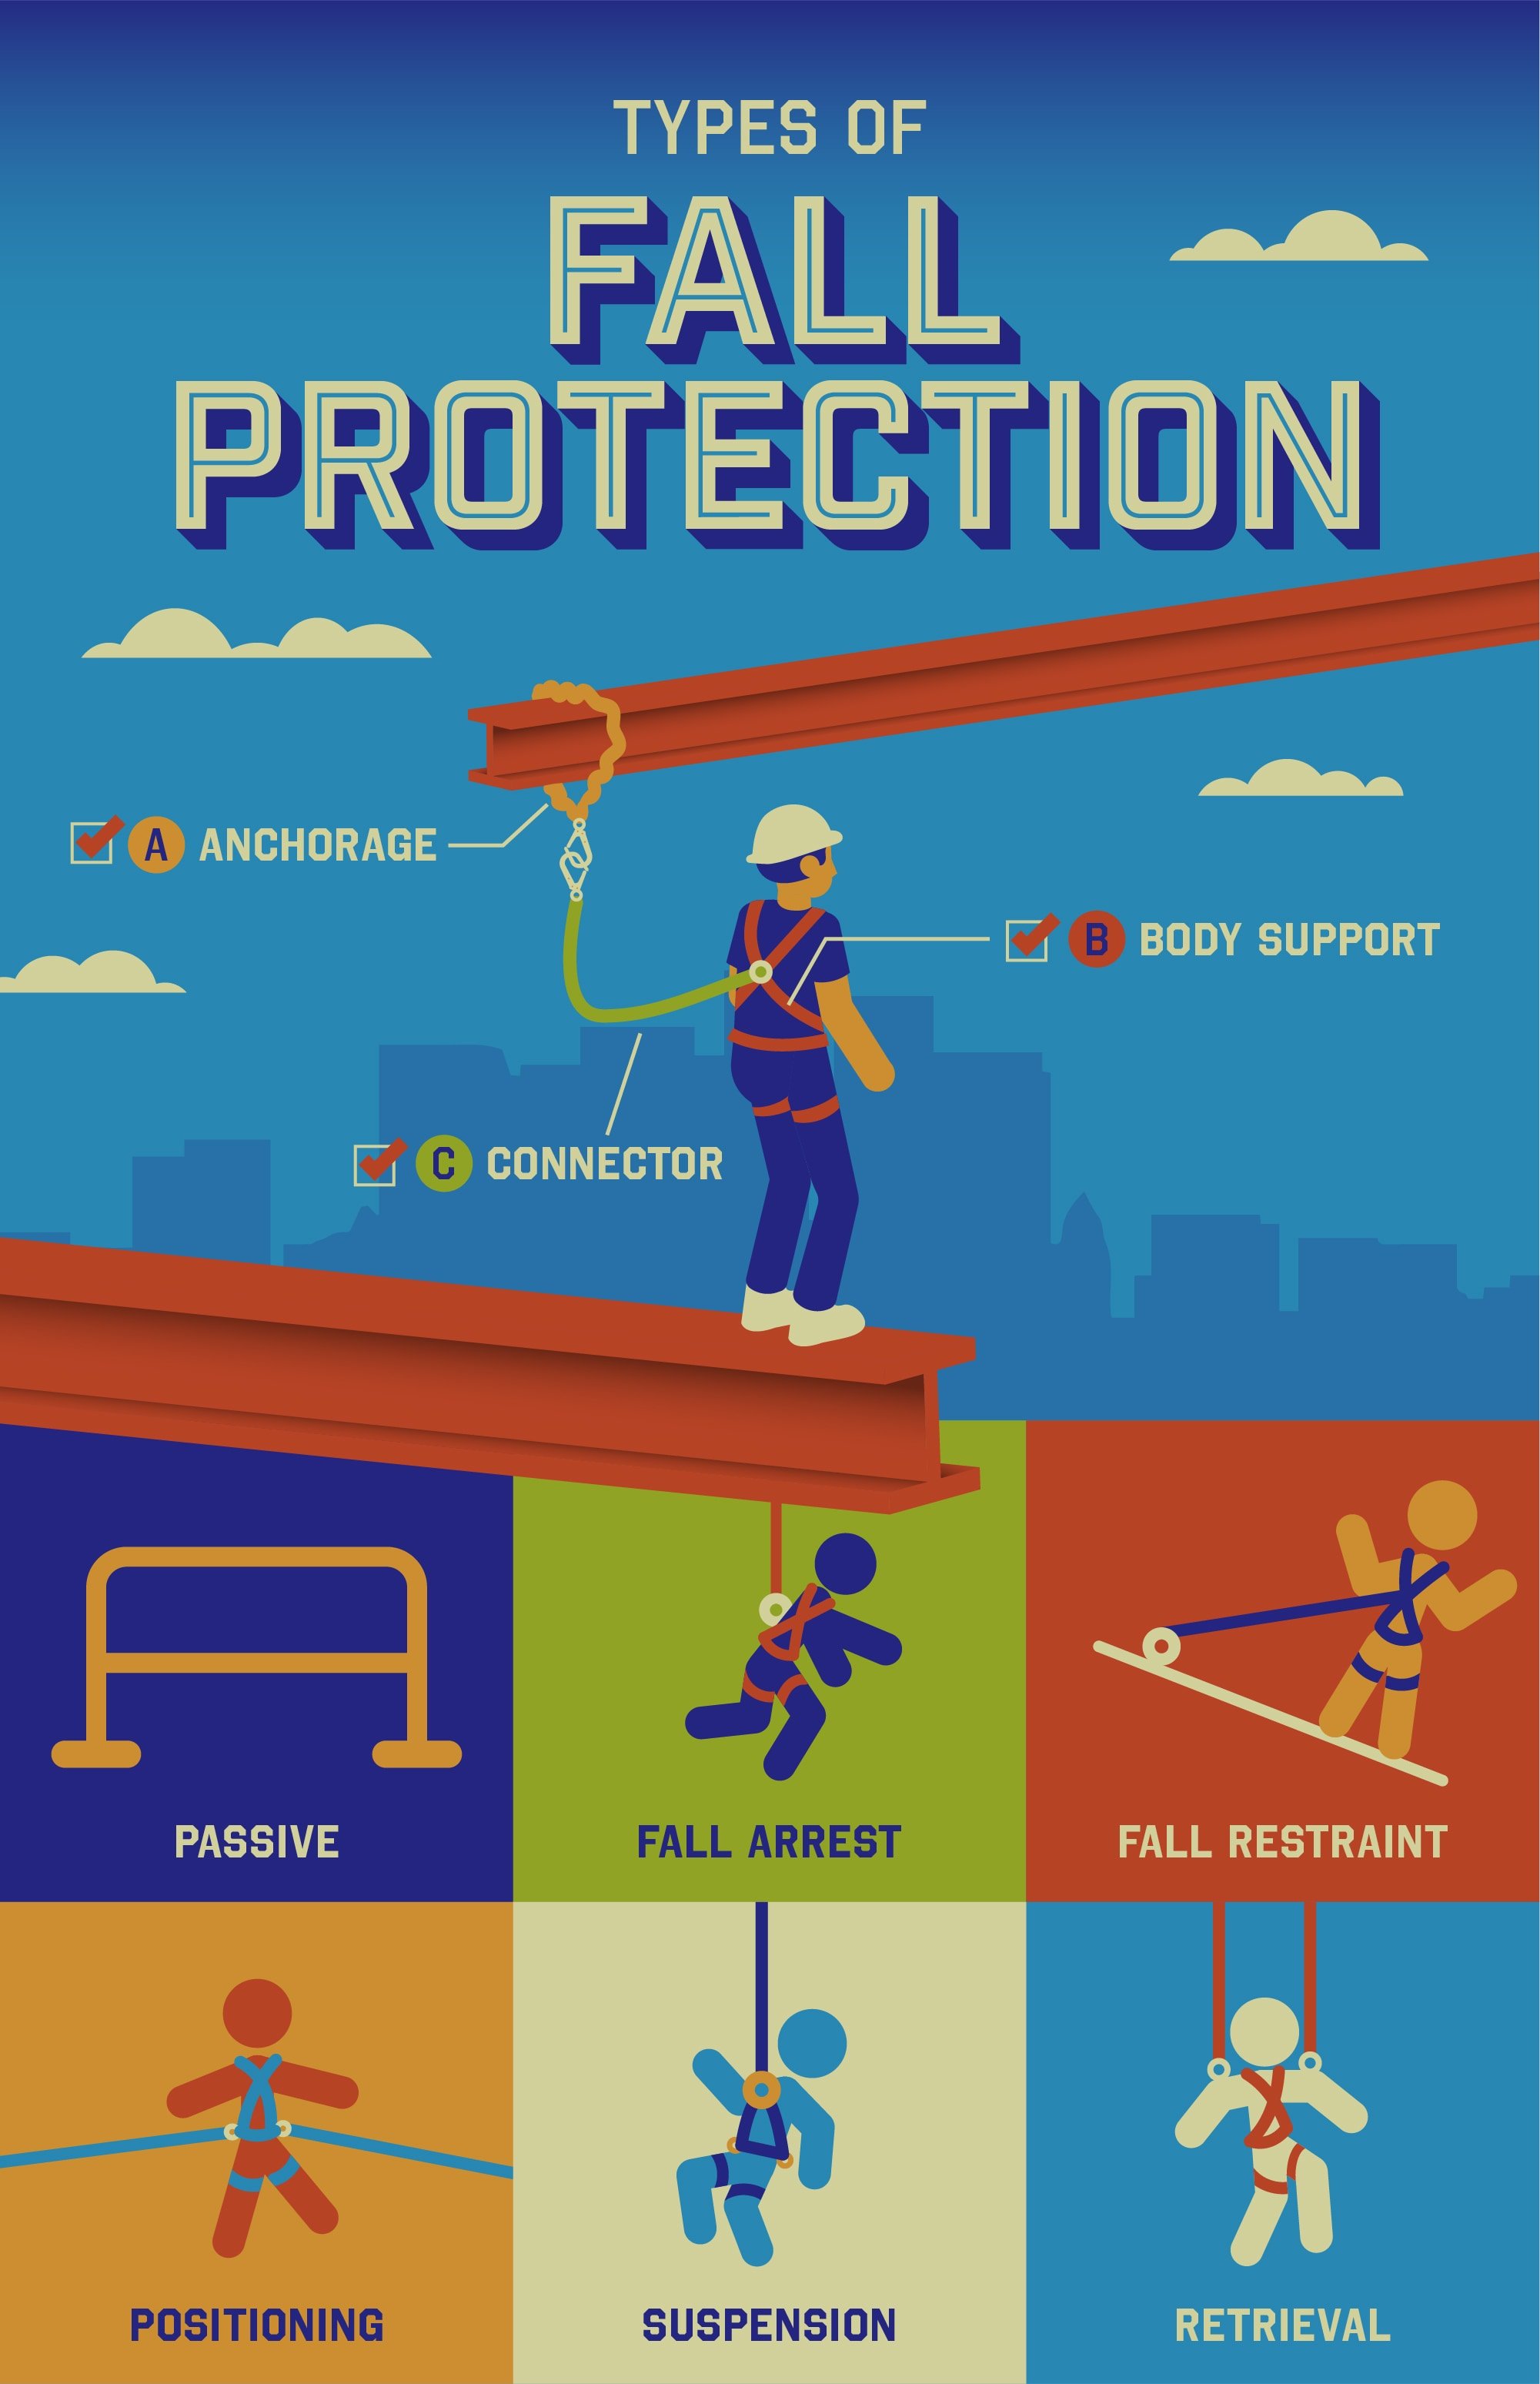 Infographic detailing types of Fall Protection and illustrations of proper technique and equipment.